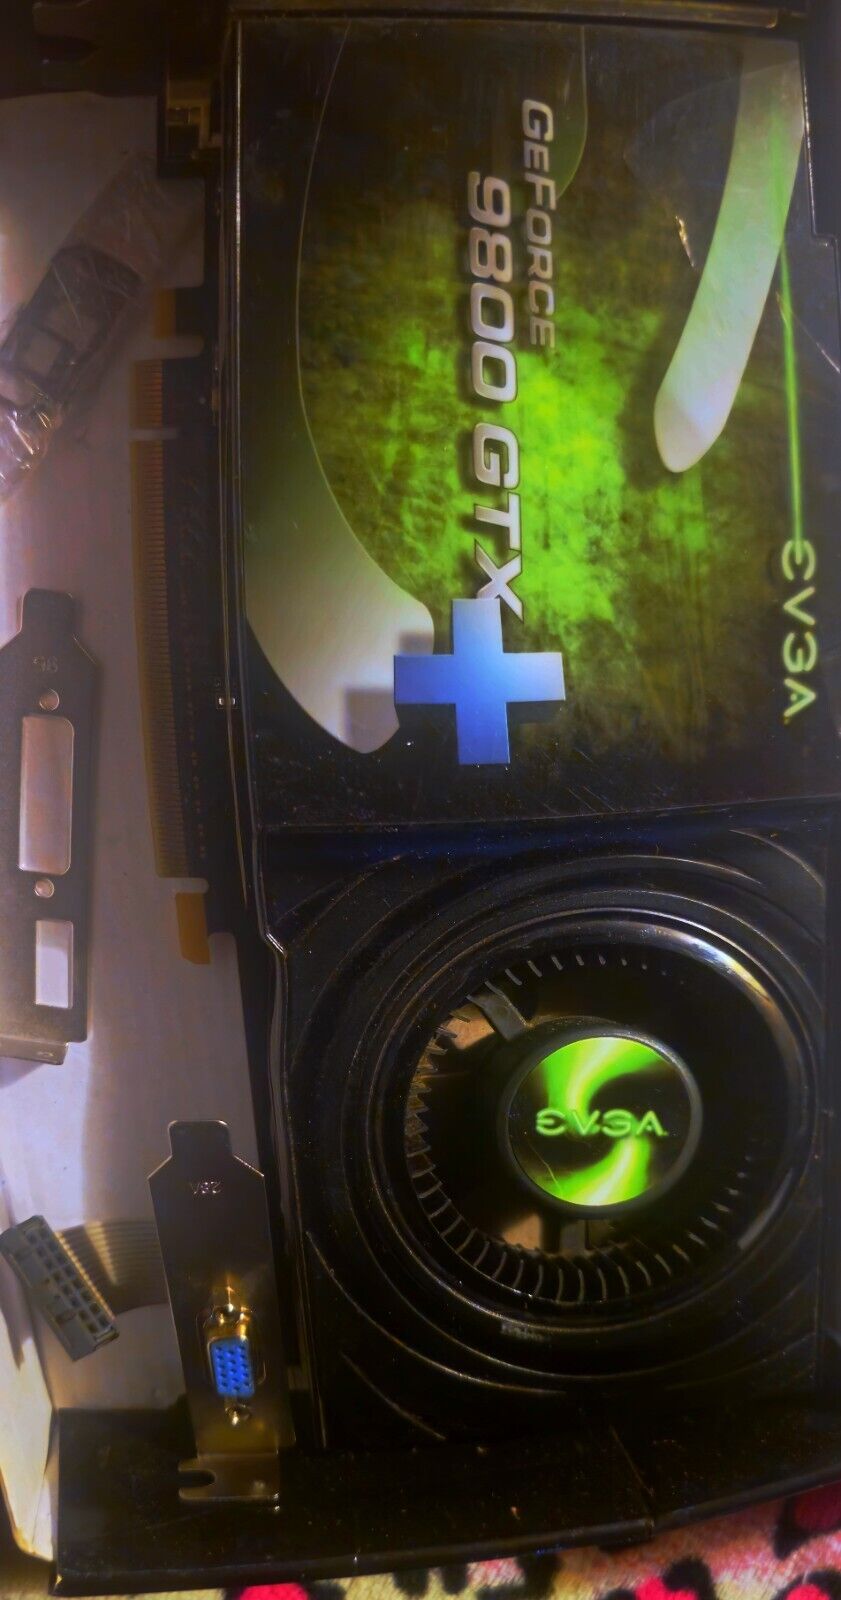 EVGA NVIDIA GeForce 9800 GTX PLUS Graphics Card GREAT CONDITION 